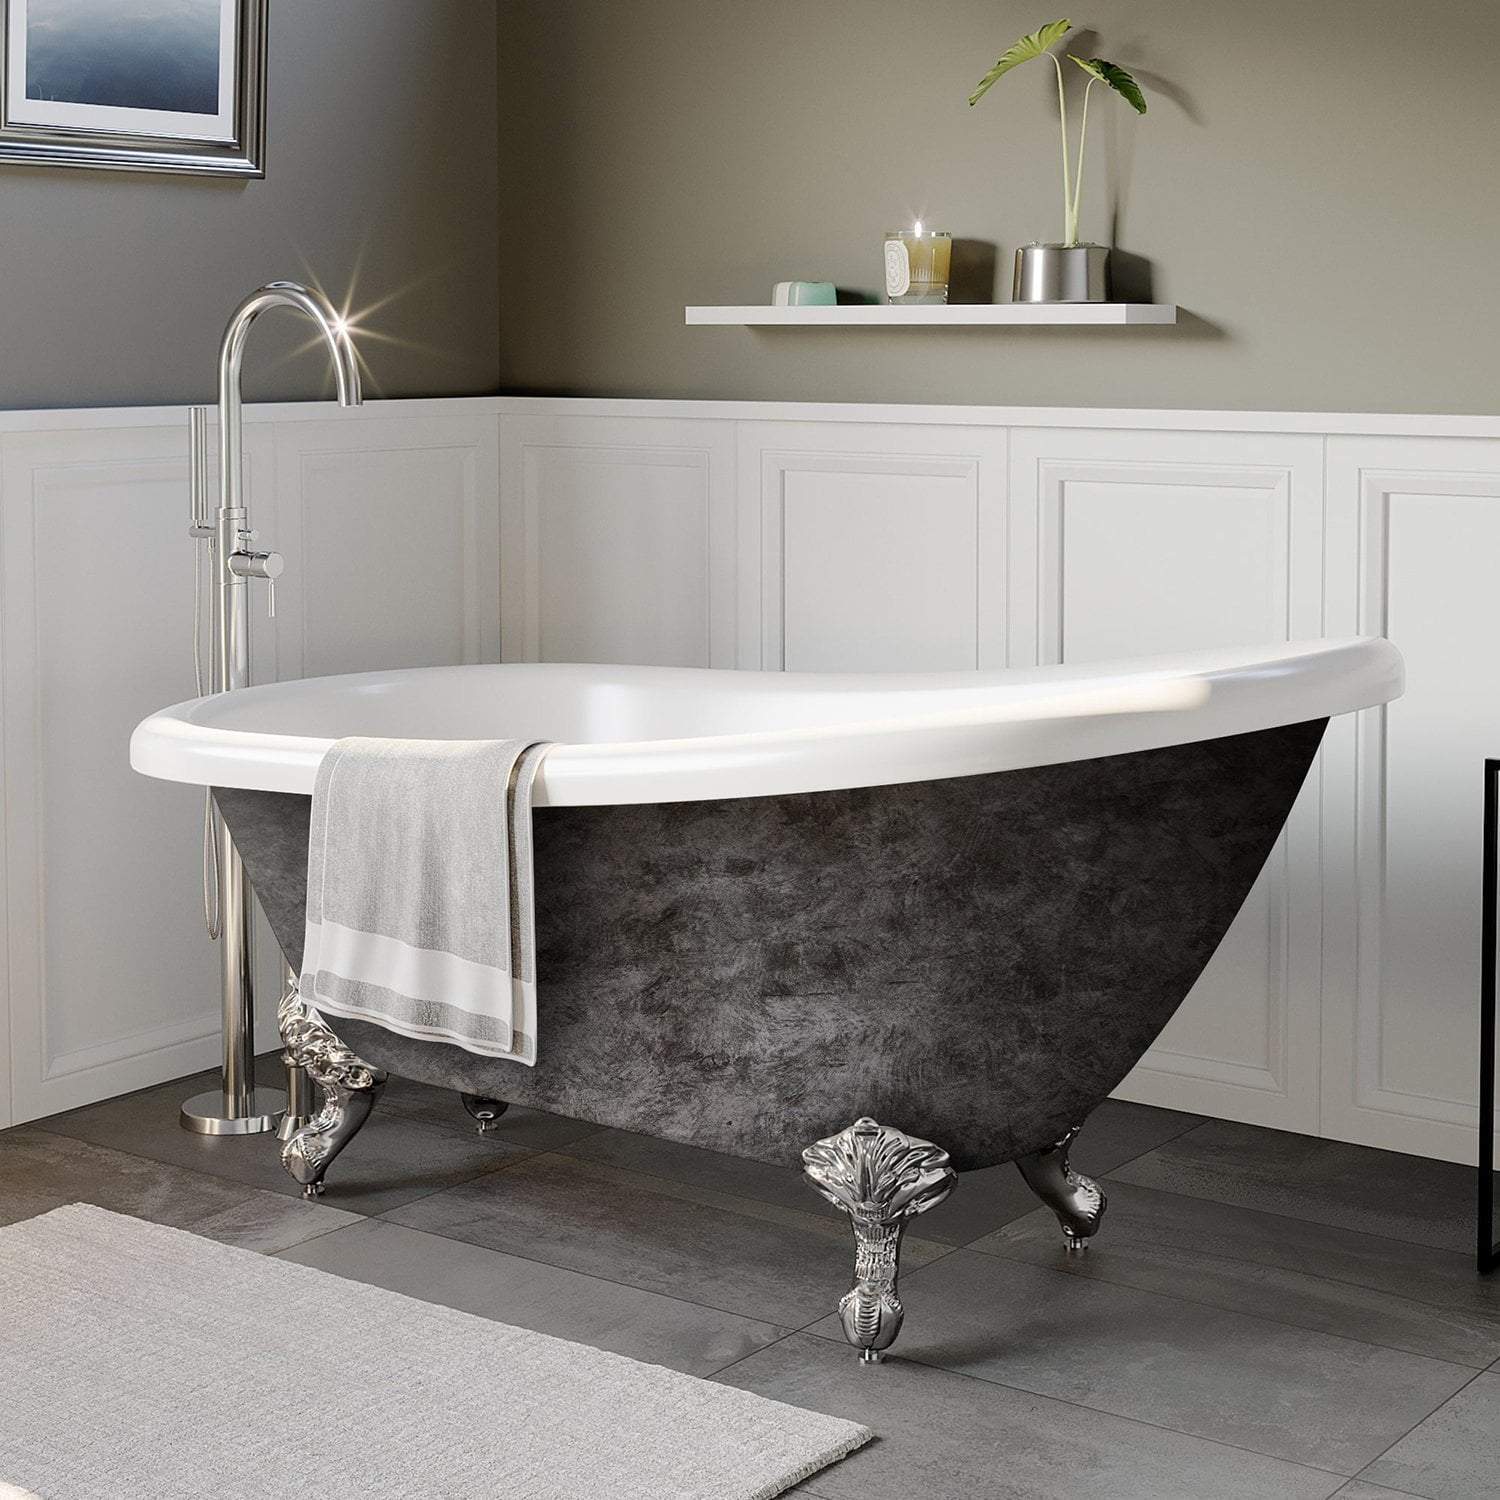 Scorched Platinum 67” x 28” Acrylic Slipper Bathtub with” No Faucet Holes and Polished Chrome Ball and Claw Feet